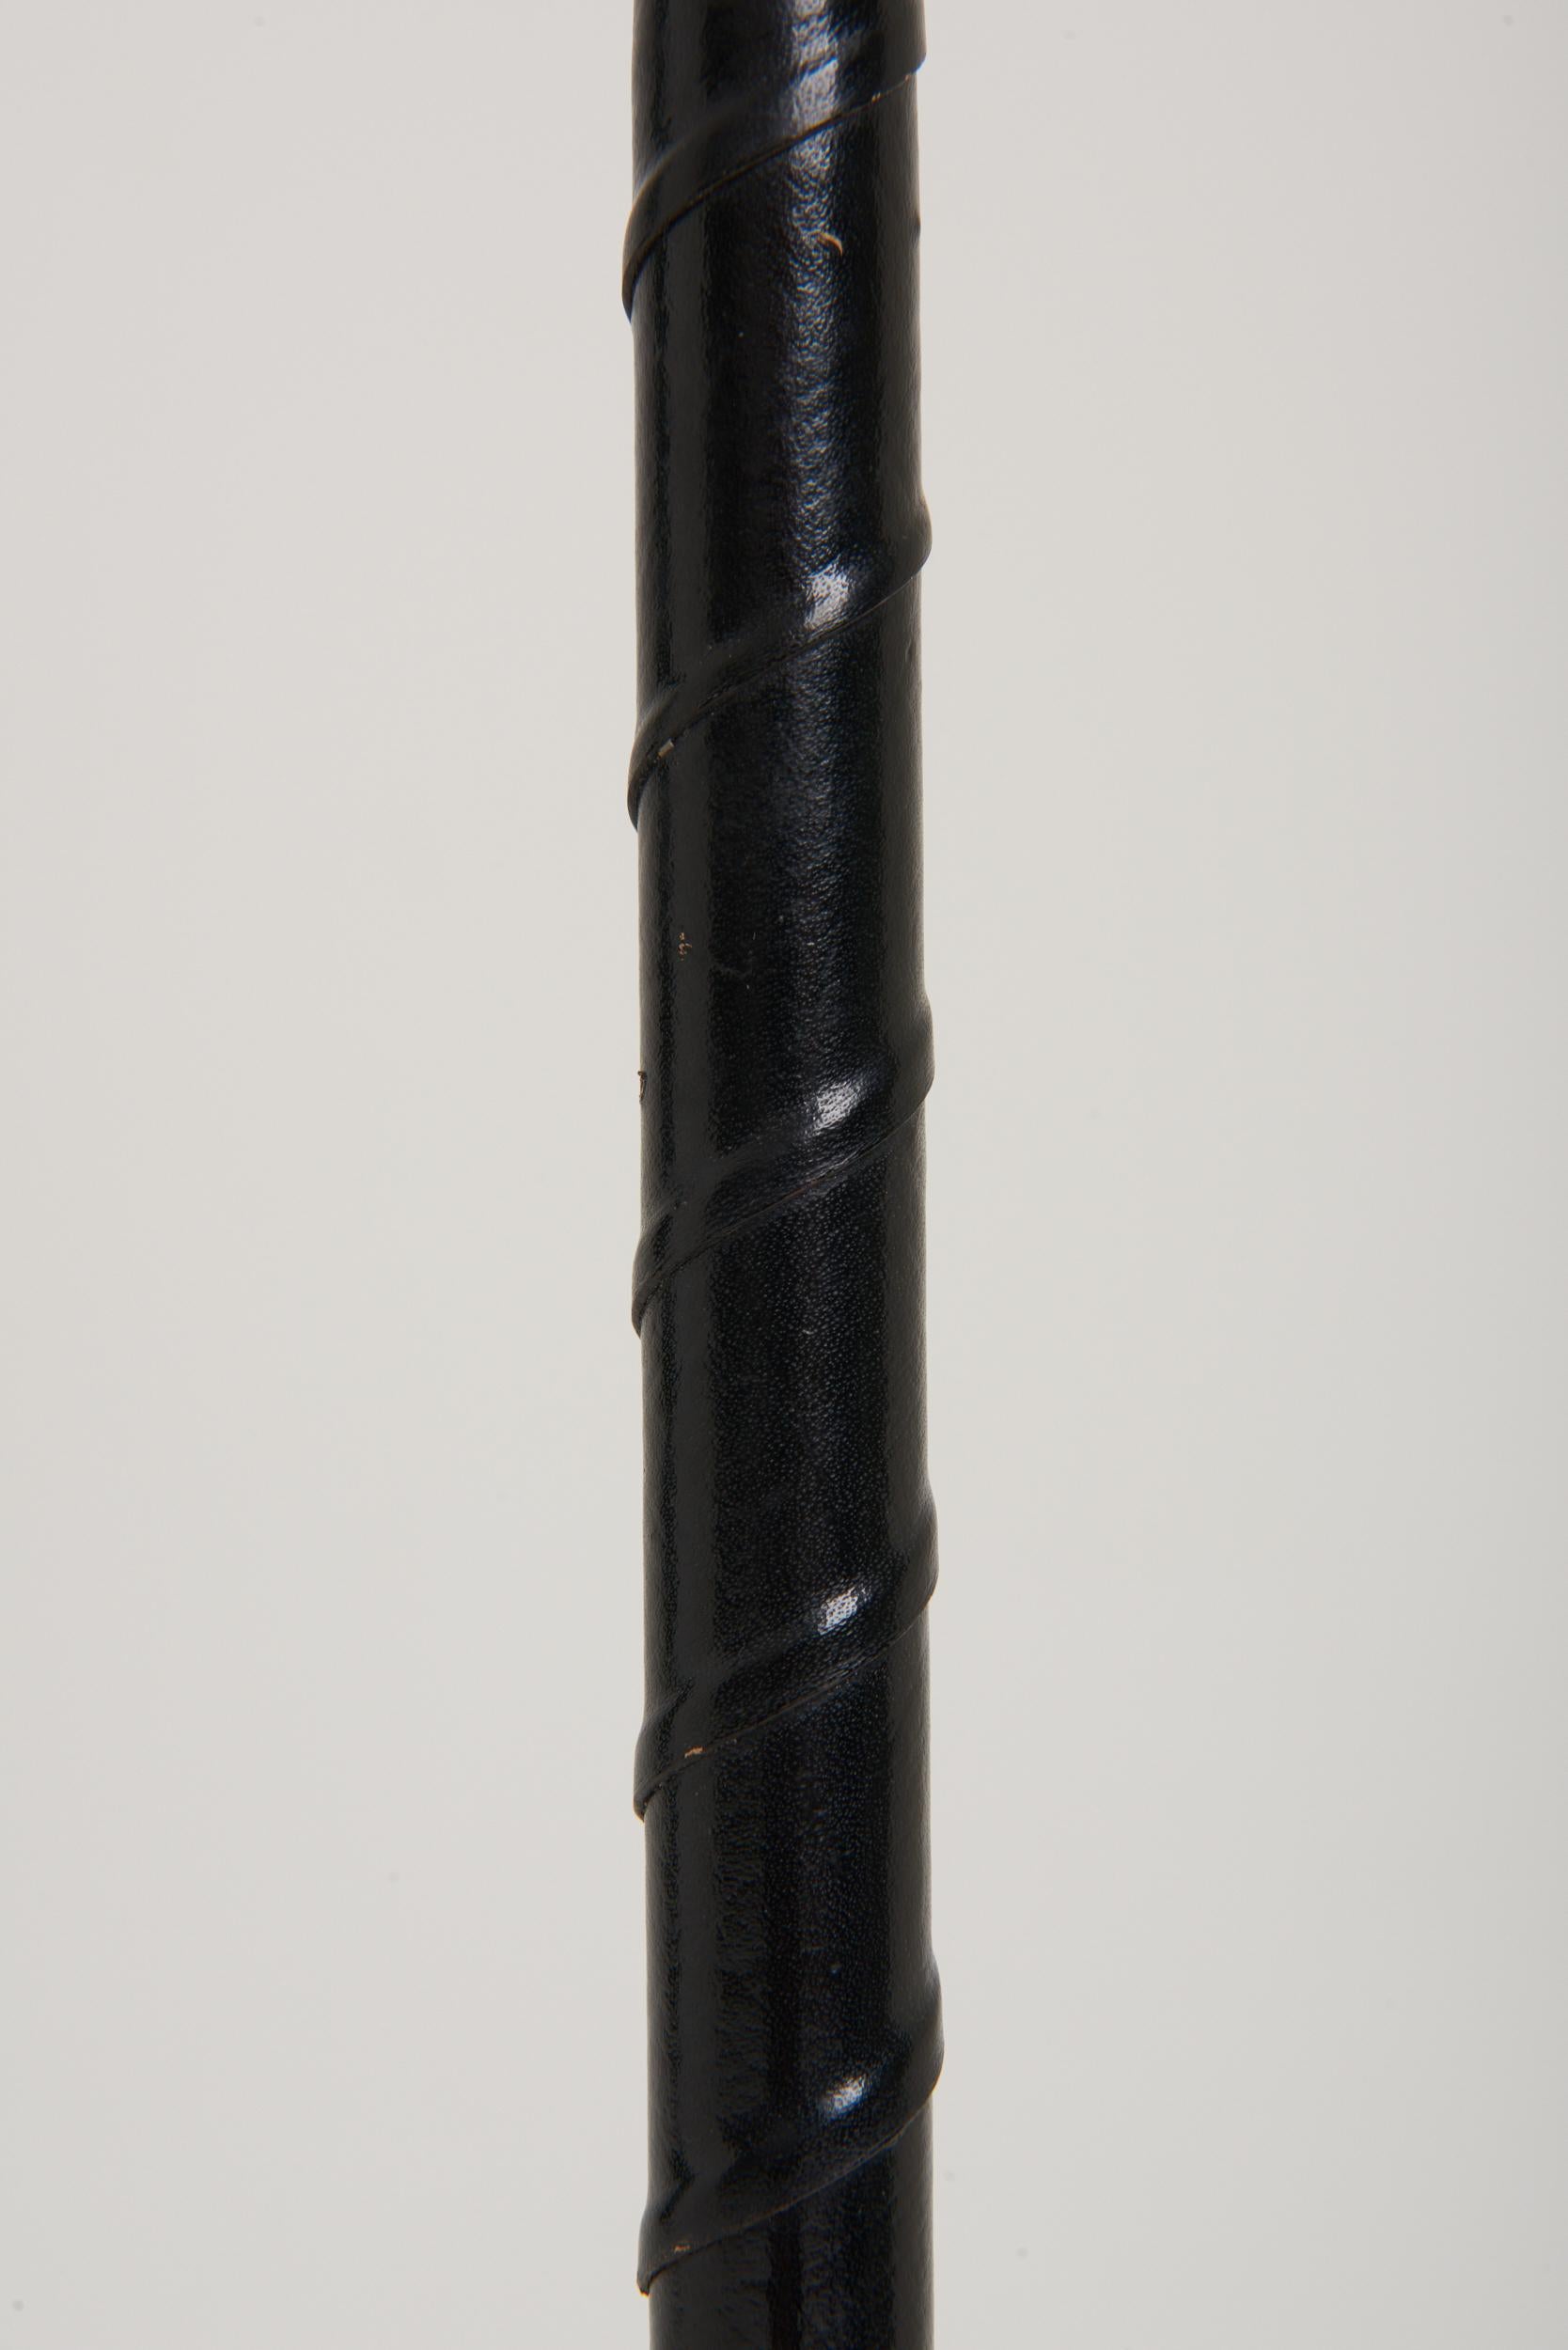 A twisted black leather and nickel floor lamp.
Sweden, third quarter of the 20th Century.
Measures: With the shade: 155 cm high by 45 cm diameter.
Lamp base only: 130 cm high by 25 cm diameter.